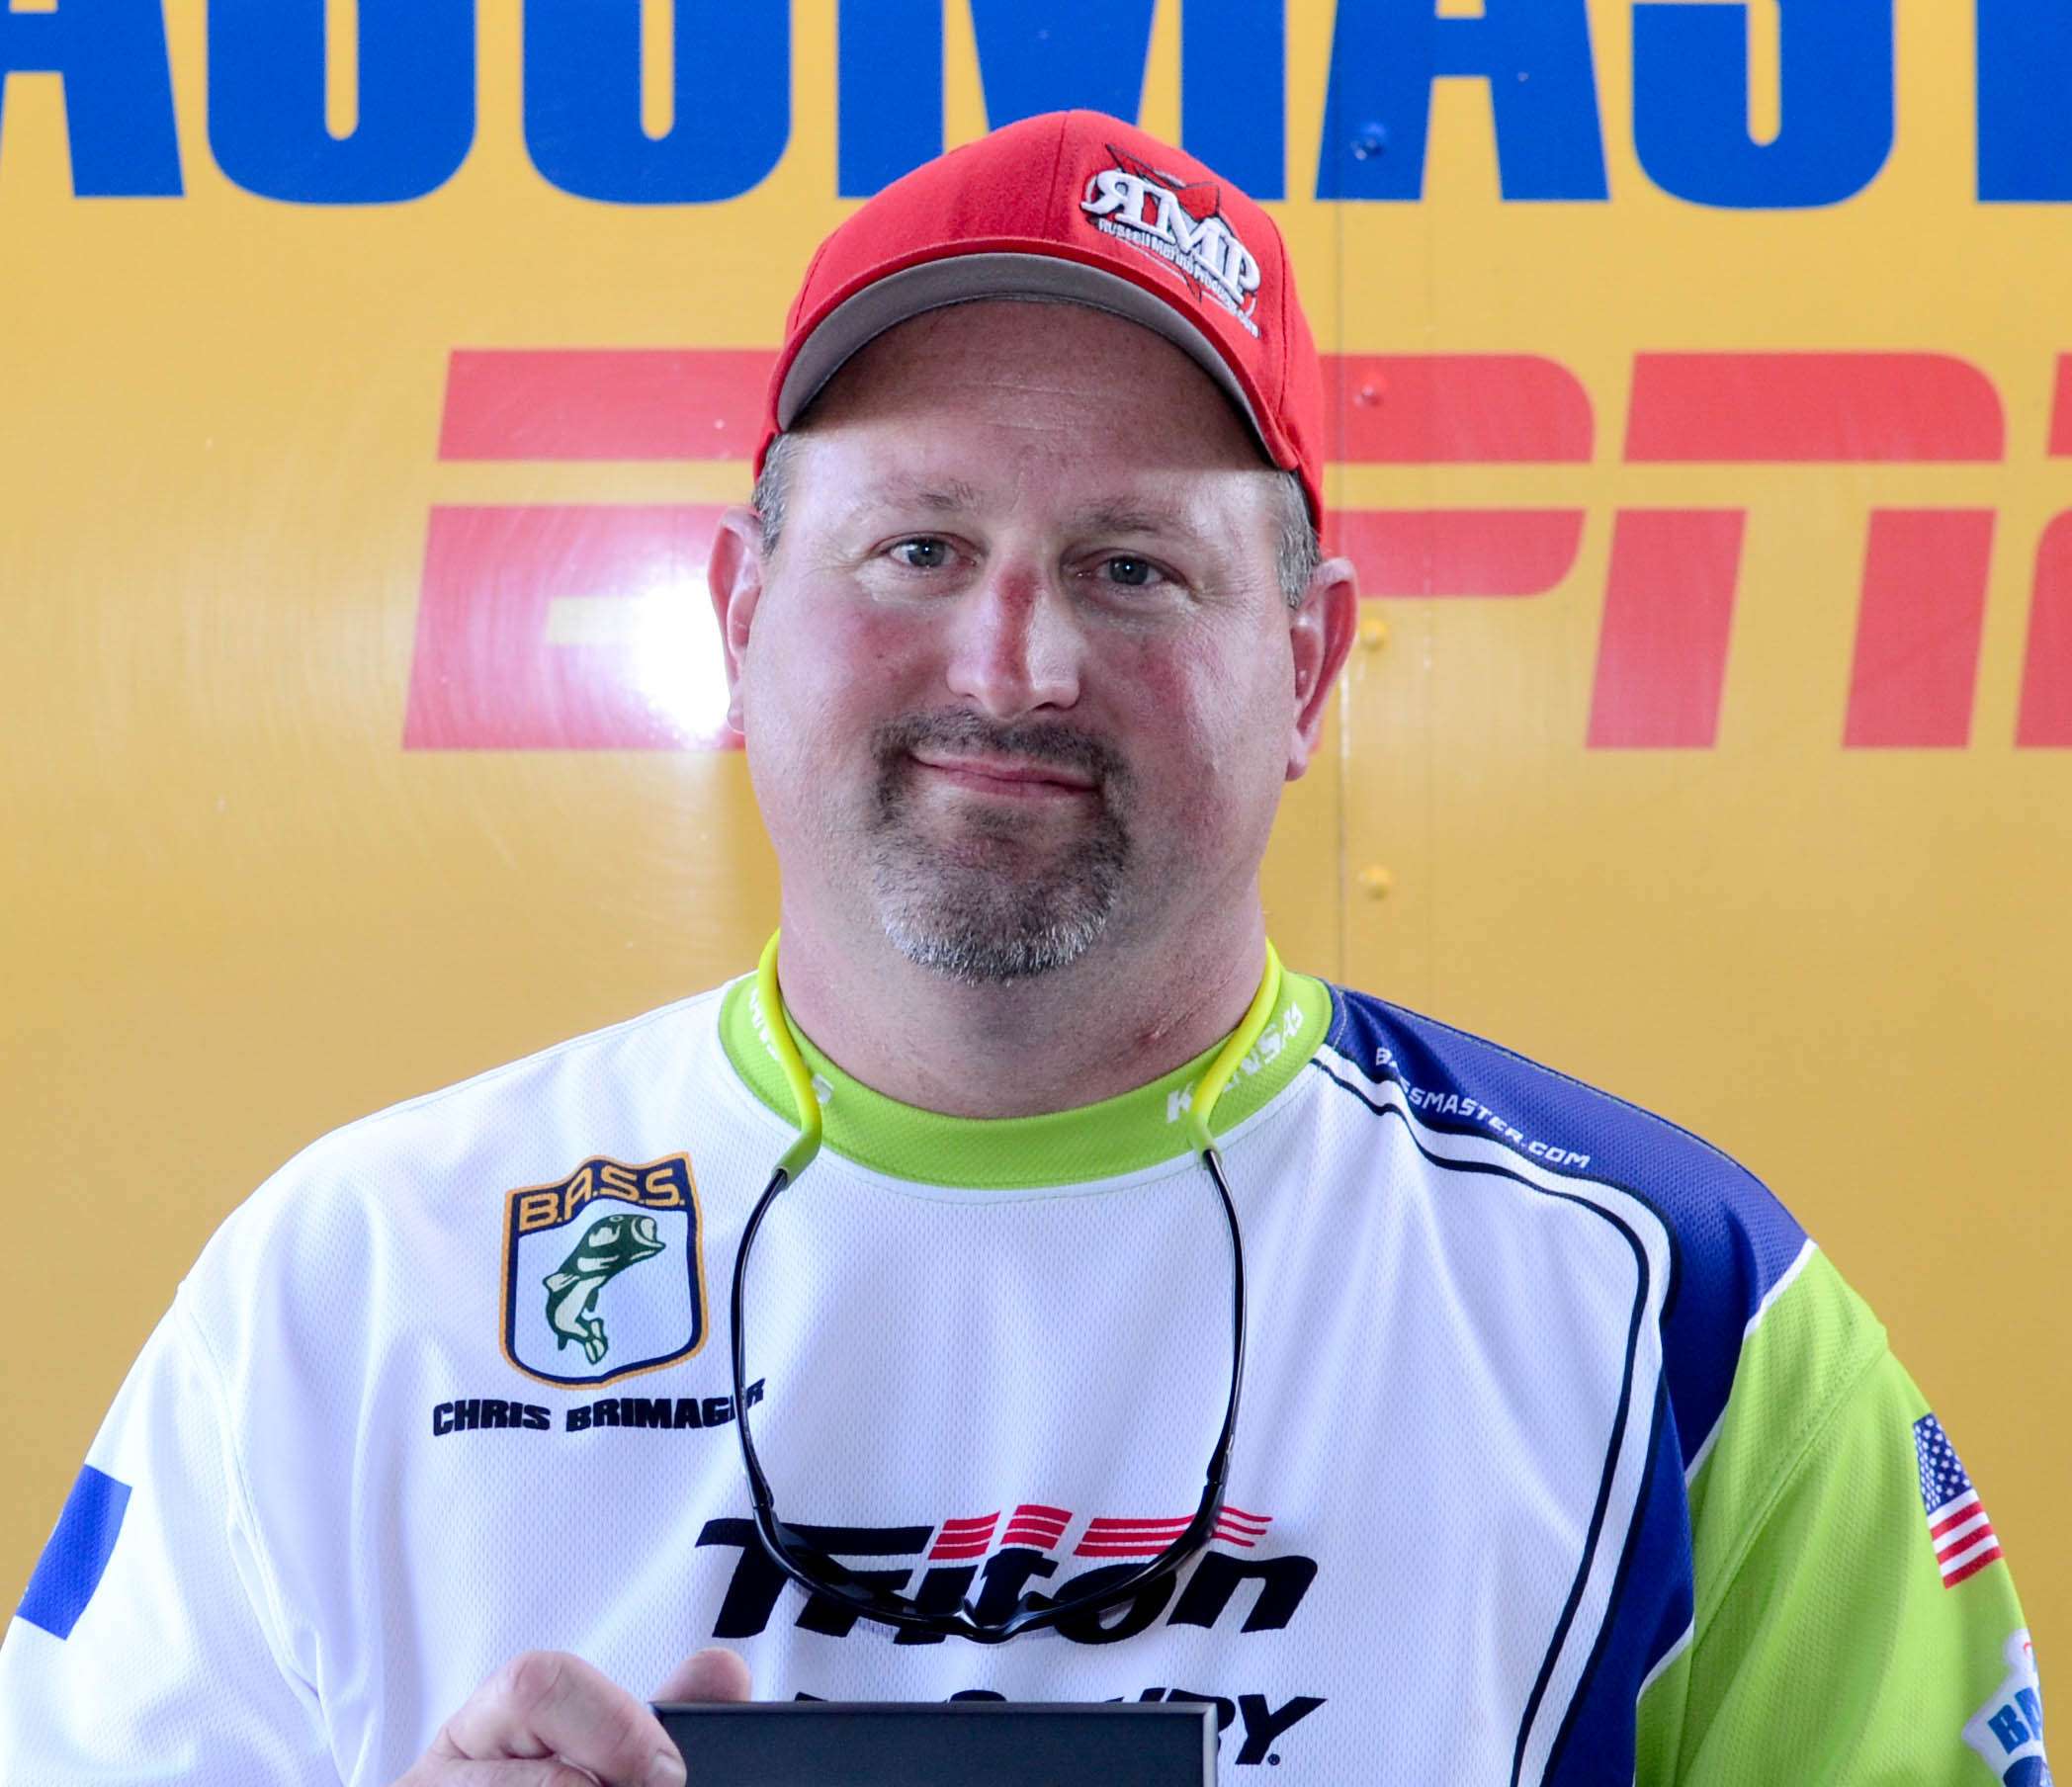 Chris Brimager <br>
Kansas Boater <br>
Chris Brimager will represent Kansas in his first championship. Heâs a member of the Chisholm Trail Bass Club, and he works in sales. Brimager likes hunting and hanging out with his family. His sponsors are Shady Creek Sales, Russell Marine Products, Ranger Boats, Power-Pole, MESU Fishing and Tightlines UV. 